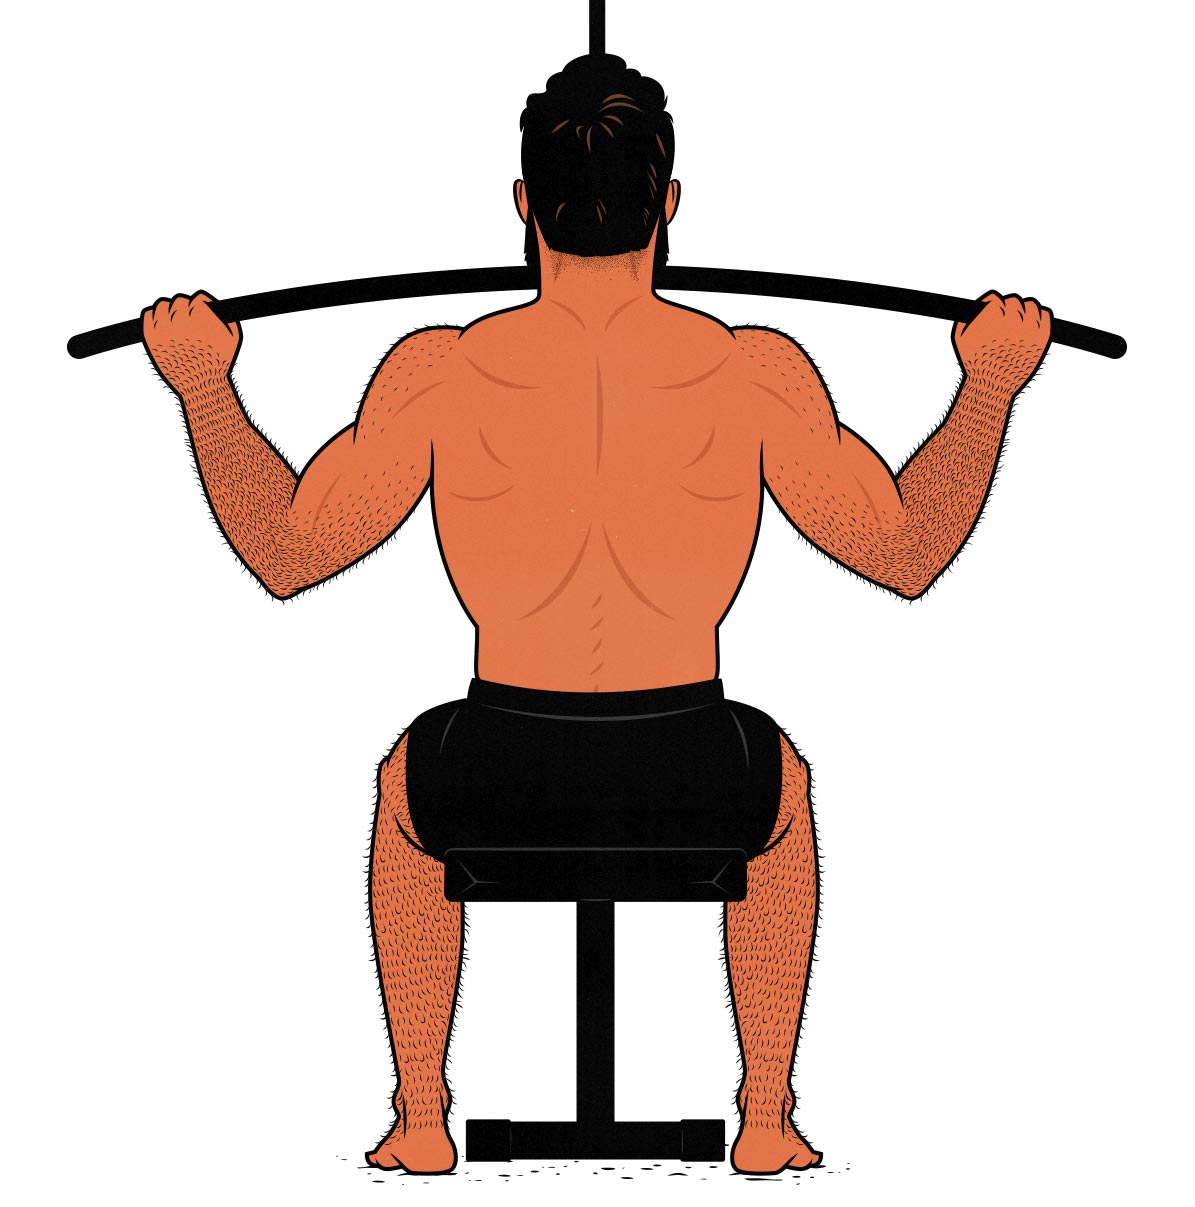 Illustration of a weight lifter doing the lat pulldown exercise during his Pull Day workout.